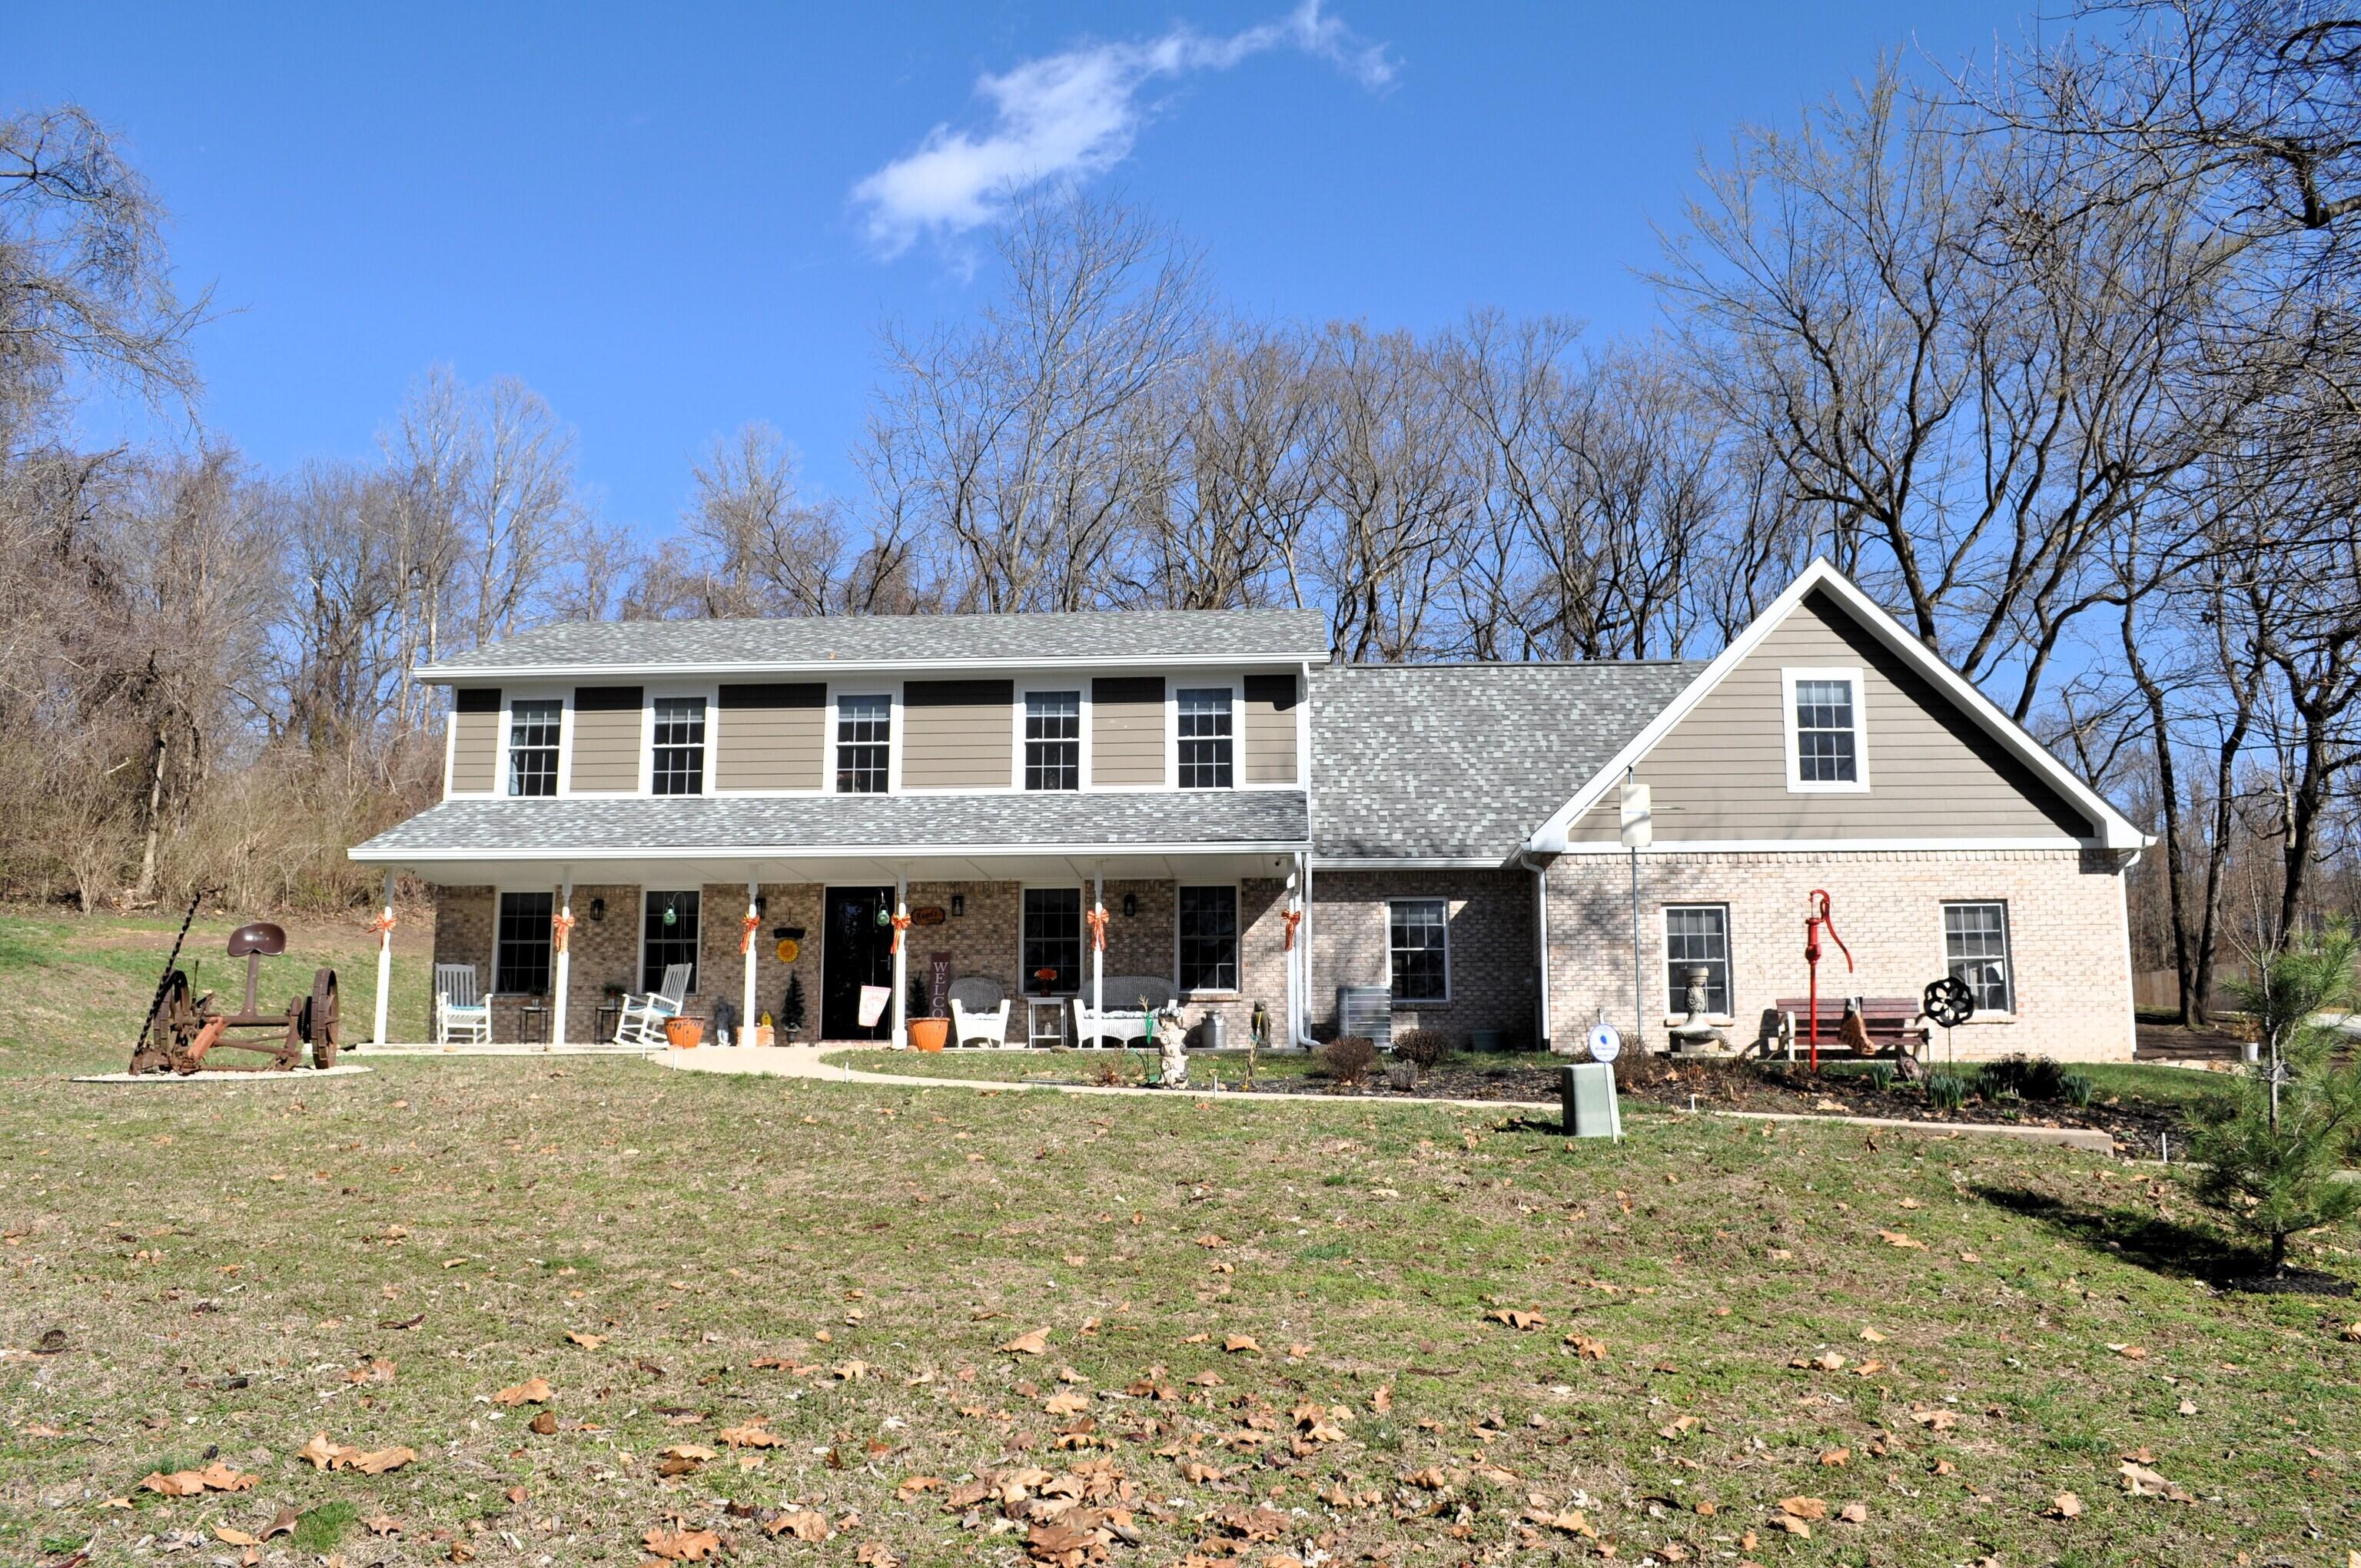 Photo one of 1453 N Blue Bluff Rd Martinsville IN 46151 | MLS 21967666